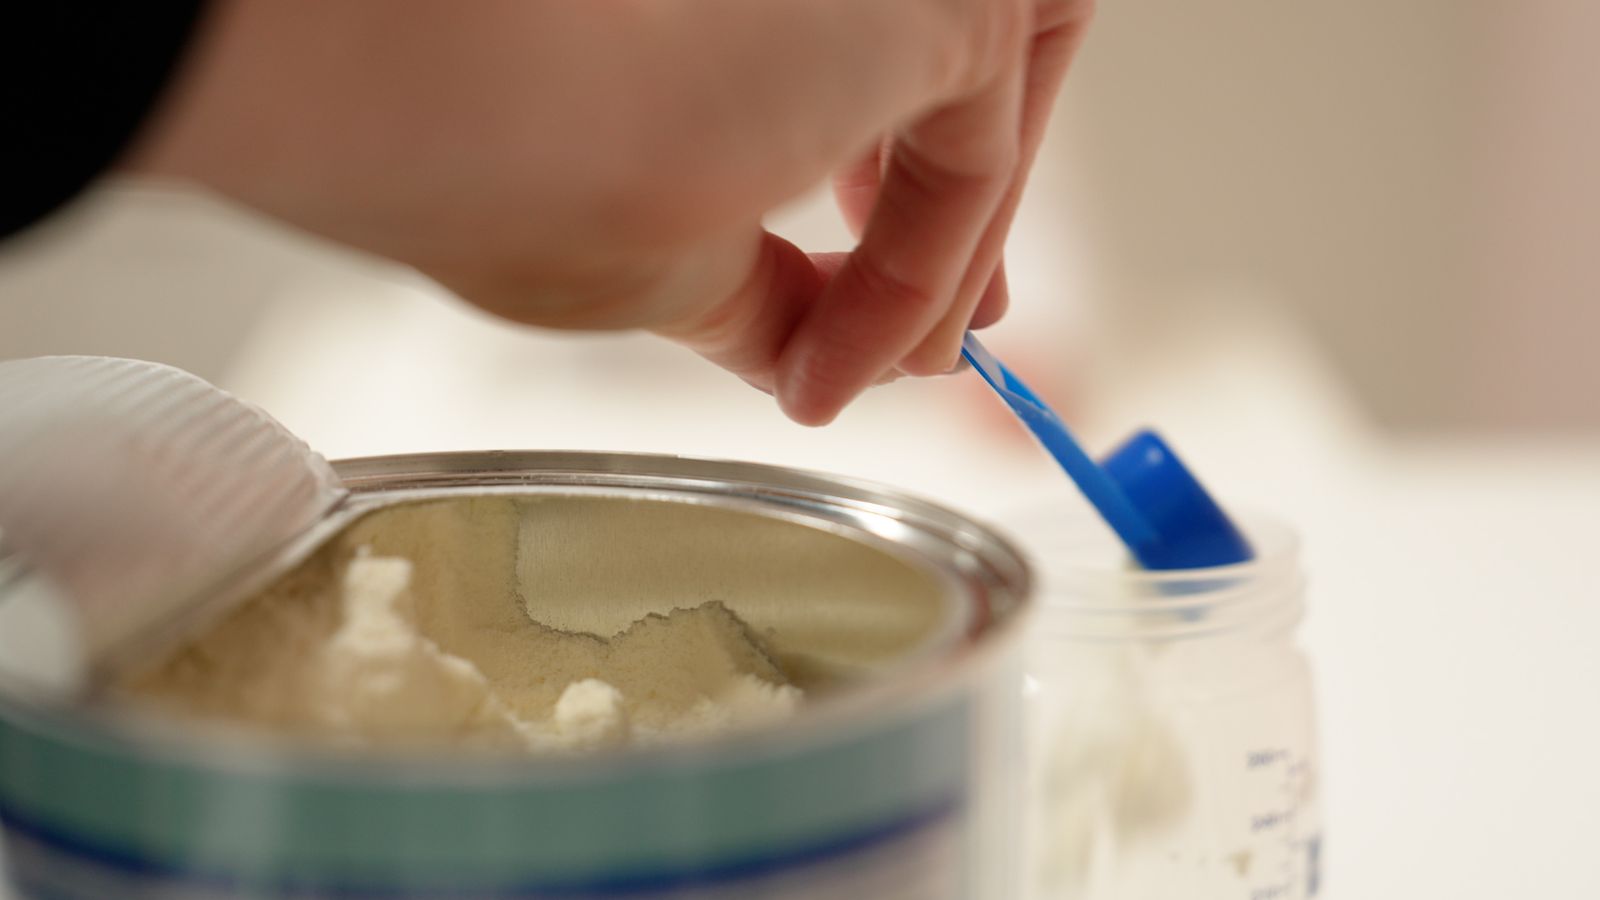 Desperate parents are stealing baby formula to keep their children fed | UK News